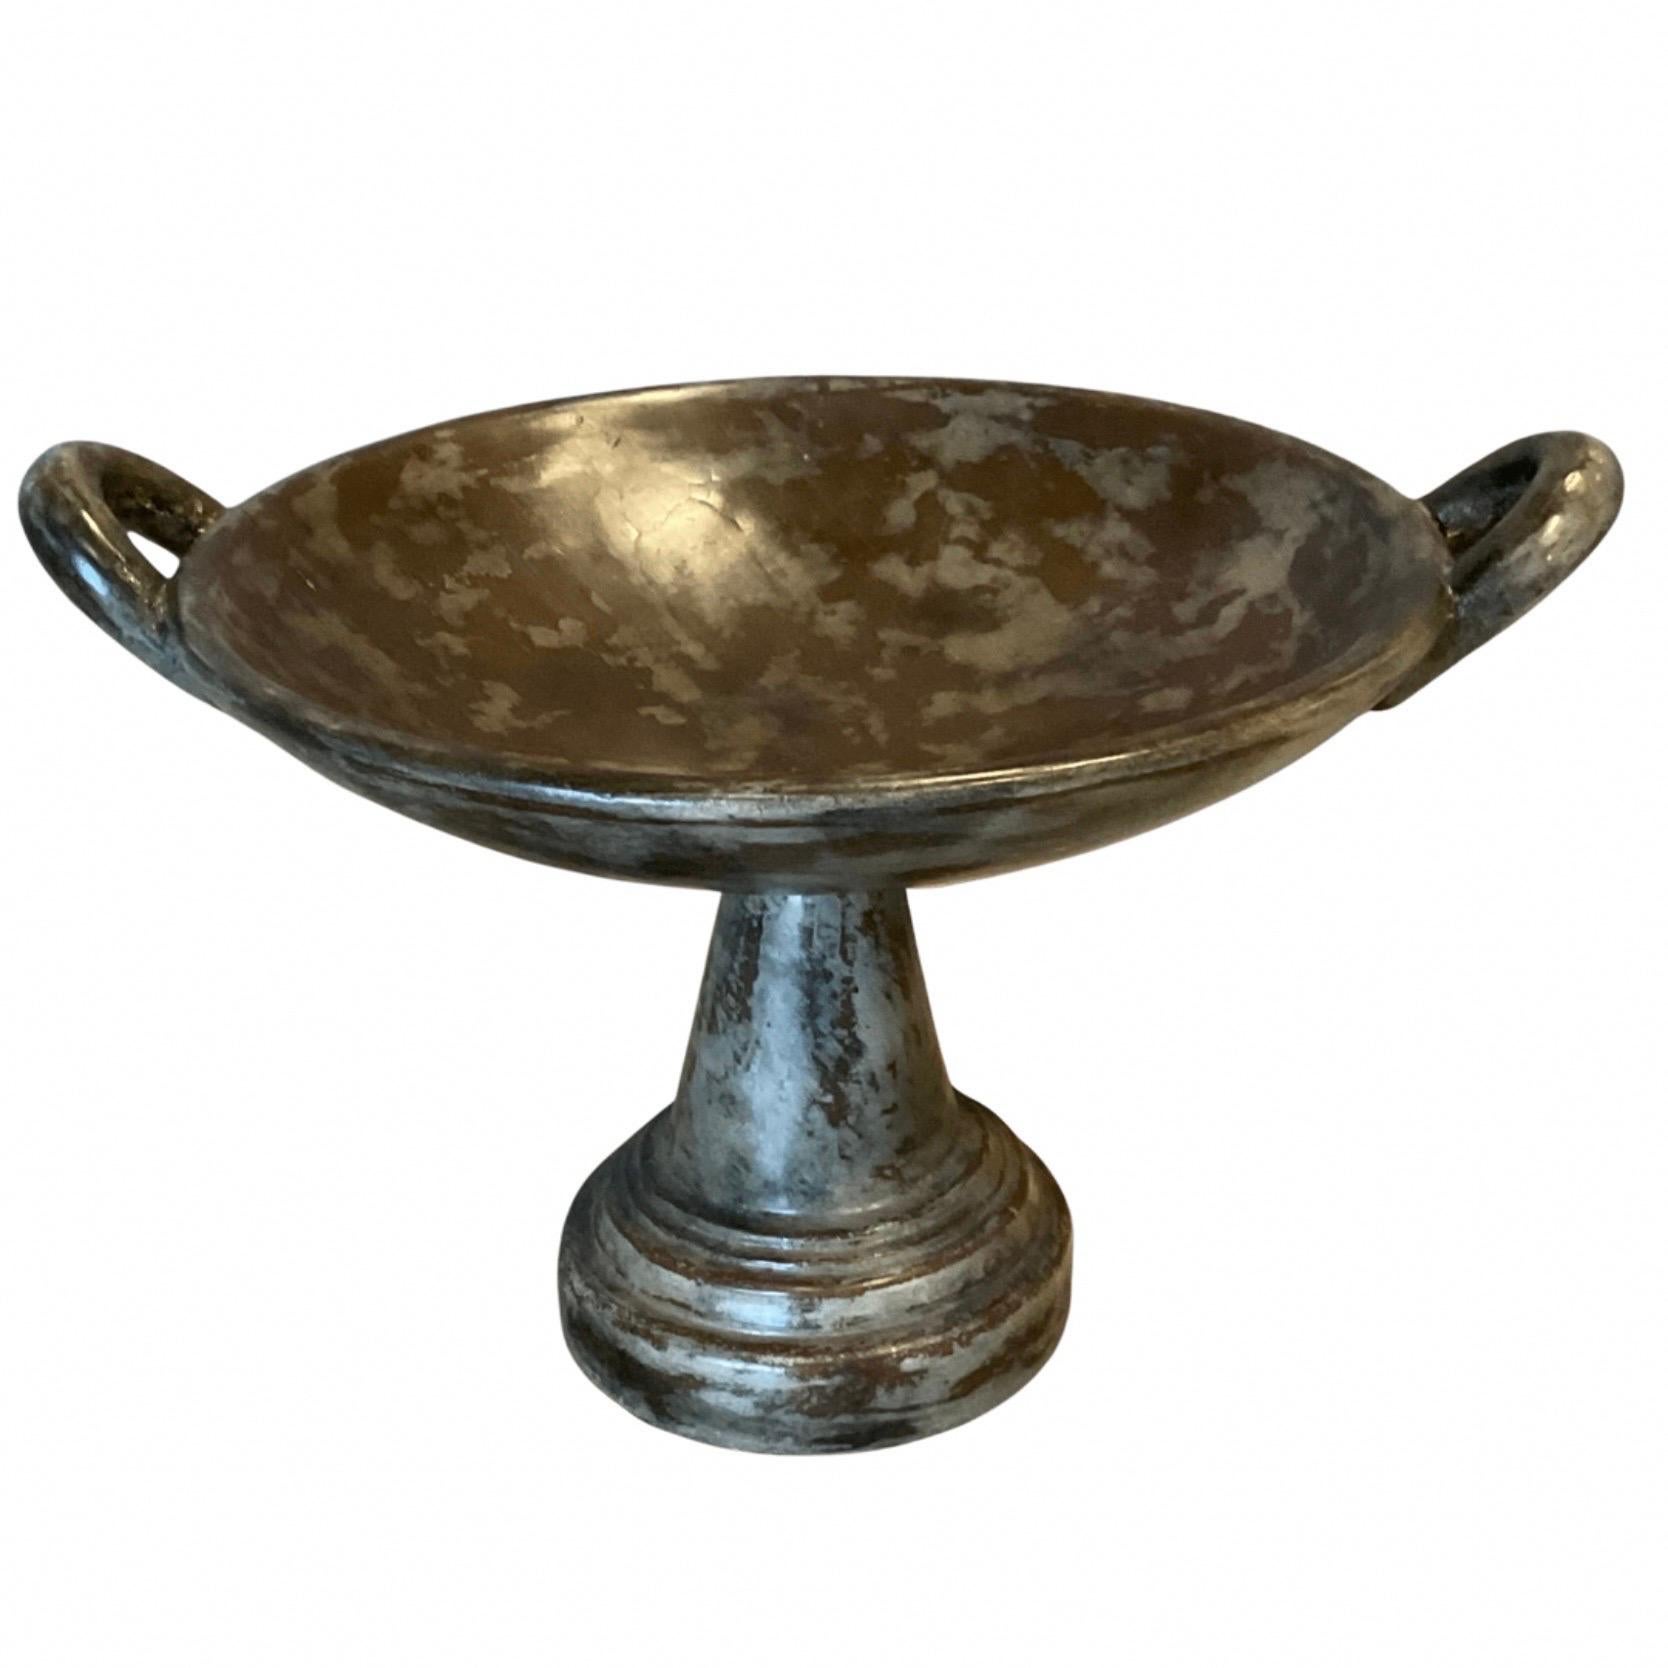 Maitland Smith
Philippines
1980's
Rare, Hard to Find Urn Style Pedestal Display Bowl
Believed to be Slate Stone
2 Handles accent this elevated dish for a multitude of uses
Great accent piece for a kitchen, bar, dining area, etc.
15.5